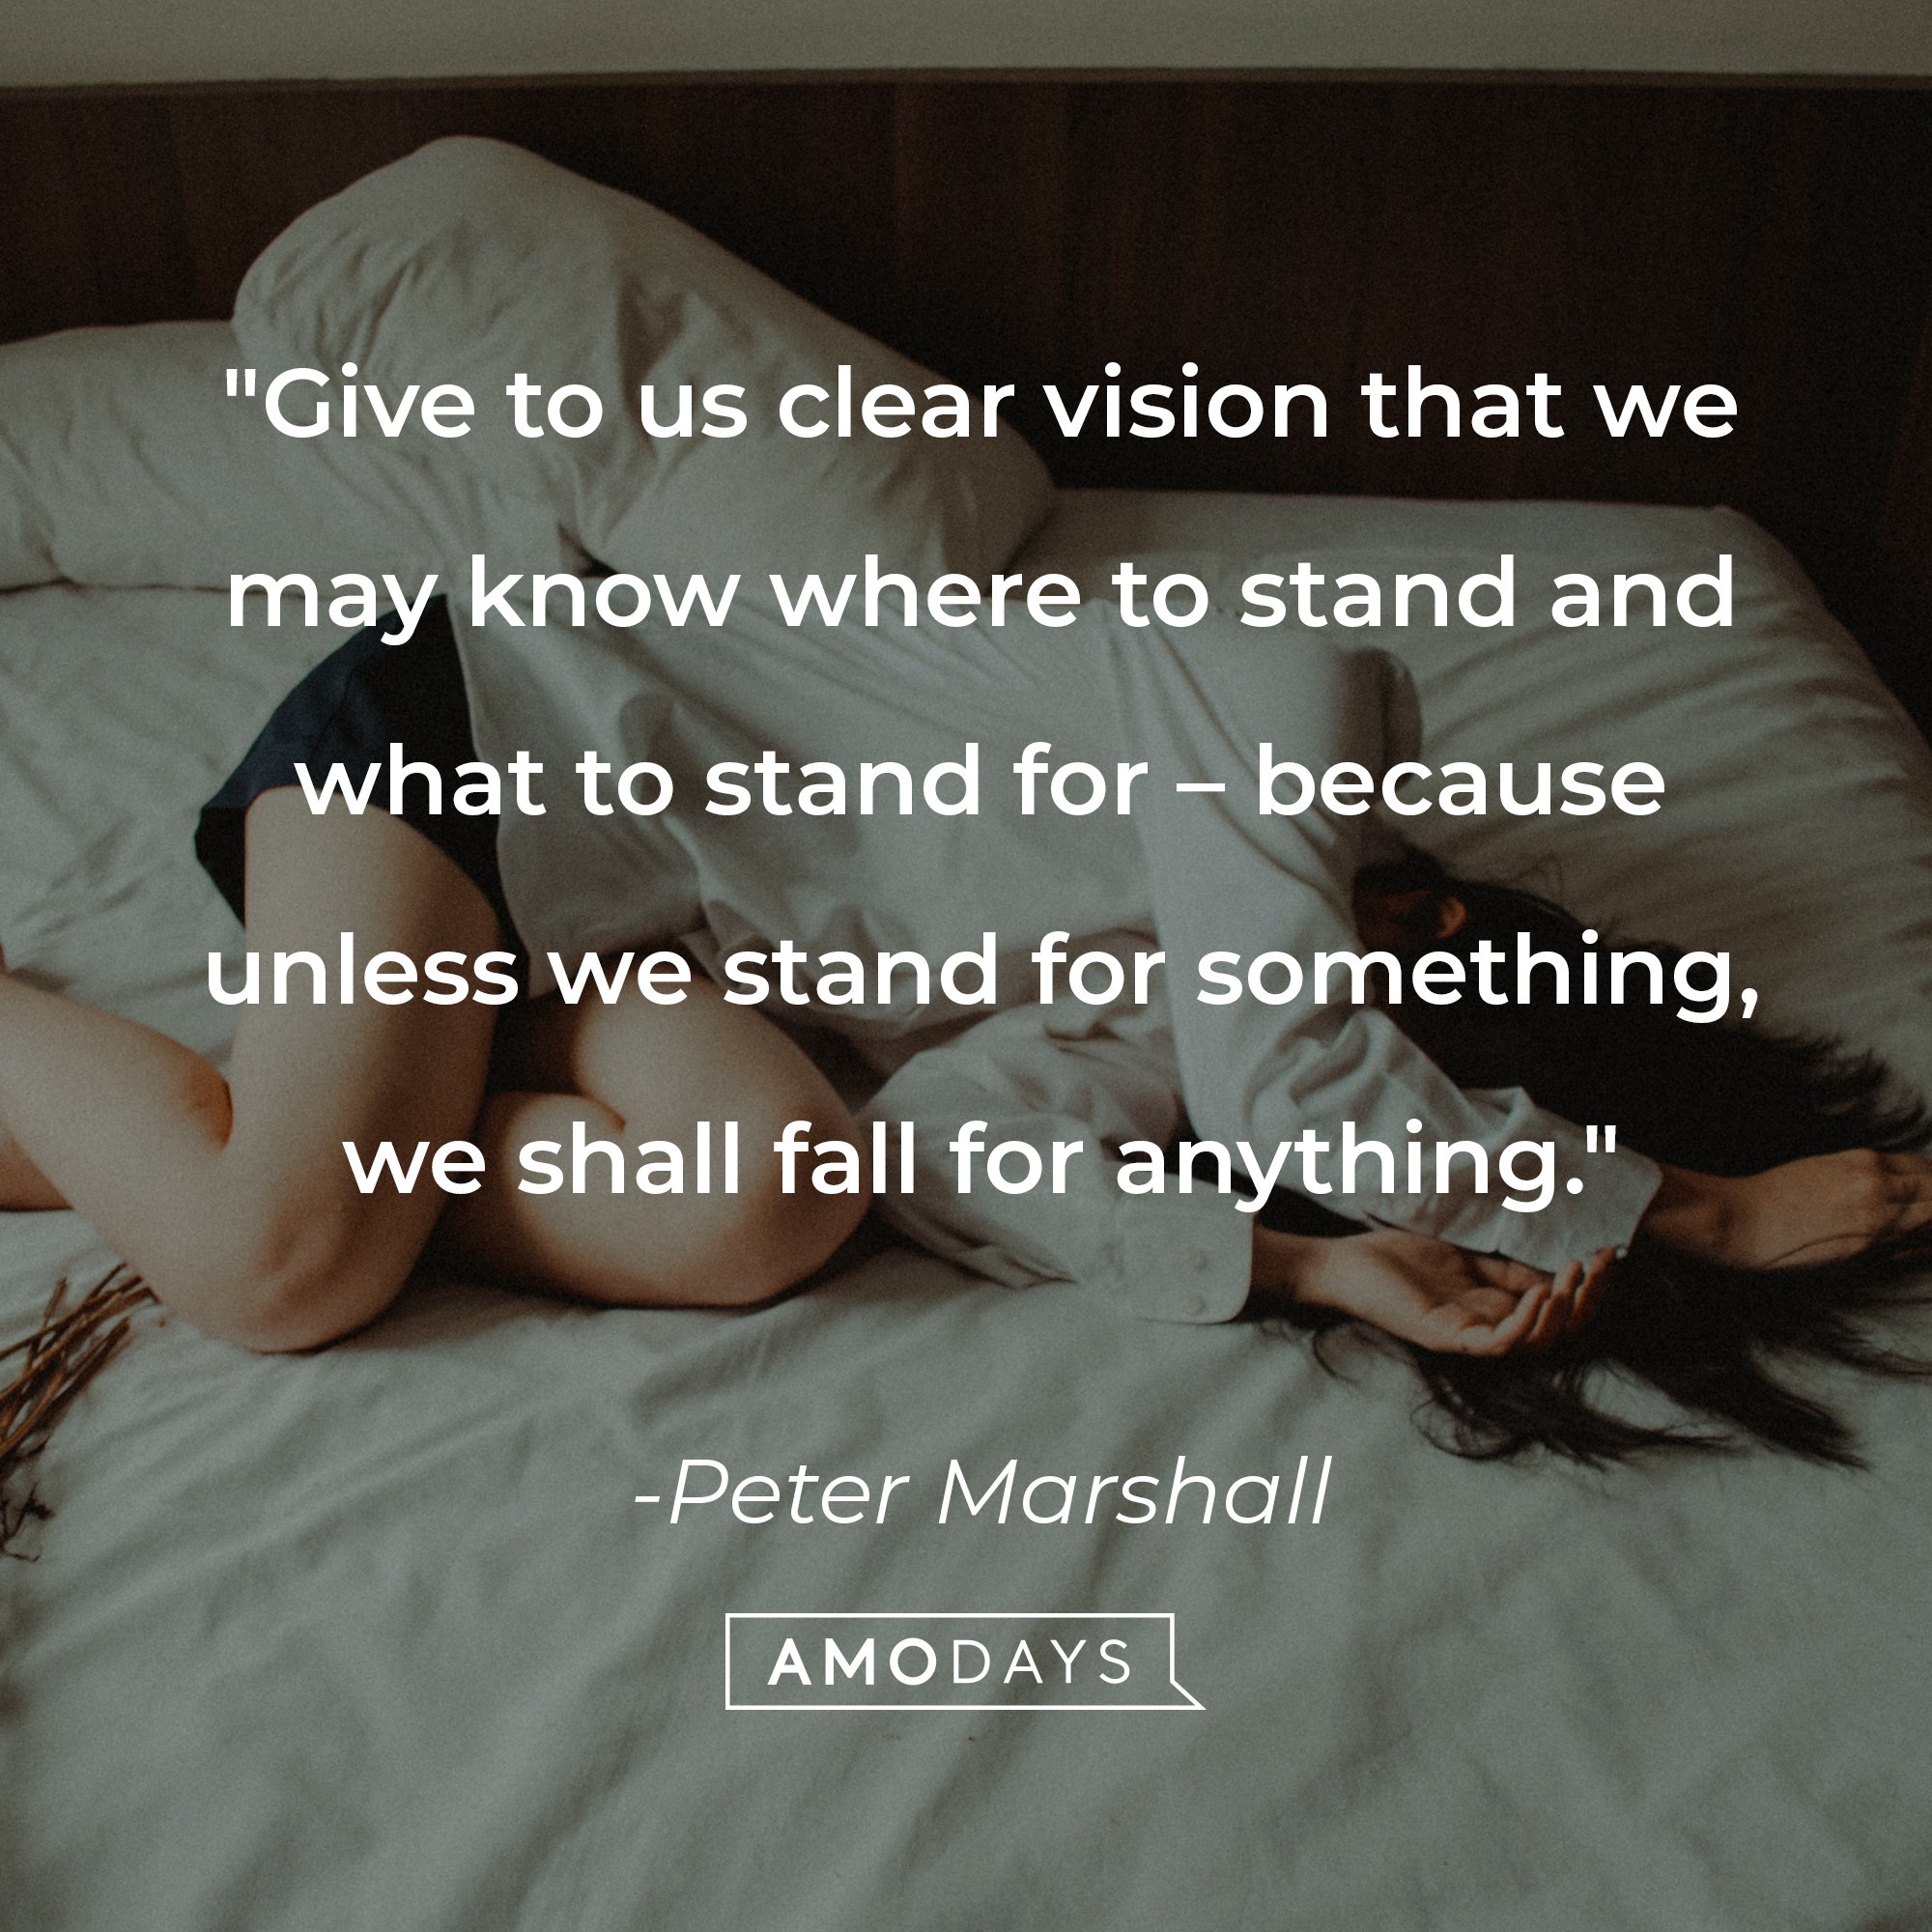 Peter Marshall's quote: "Give to us clear vision that we may know where to stand and what to stand for – because unless we stand for something, we shall fall for anything." | Image: AmoDays